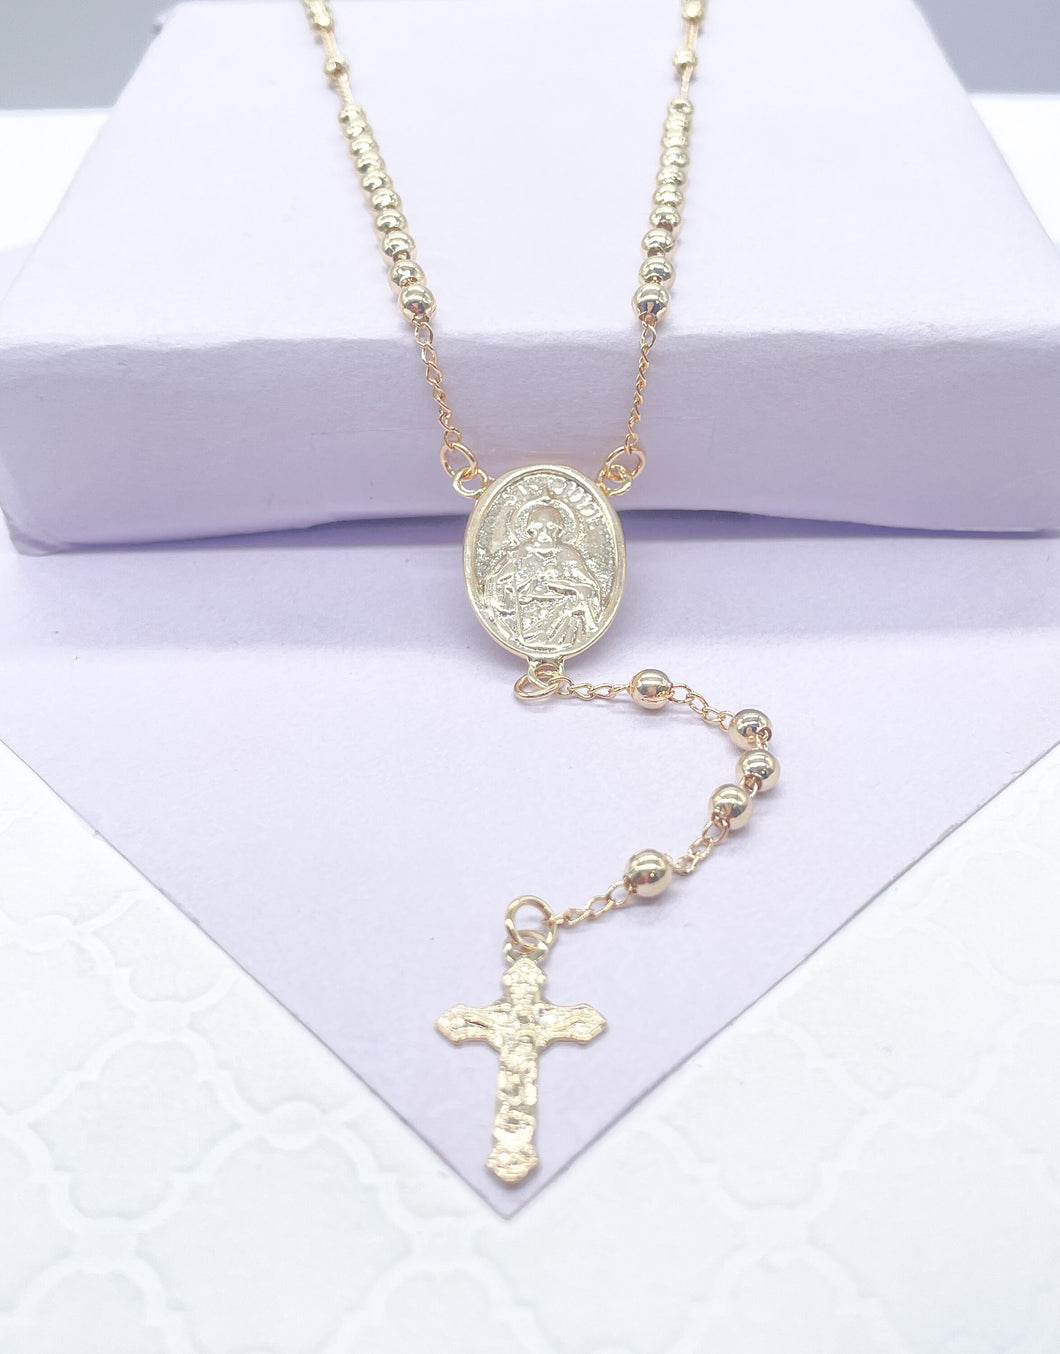 18k Gold Filled Beaded Rosary Chain With Rosary with St Jude Medallion Charm and Crucifix